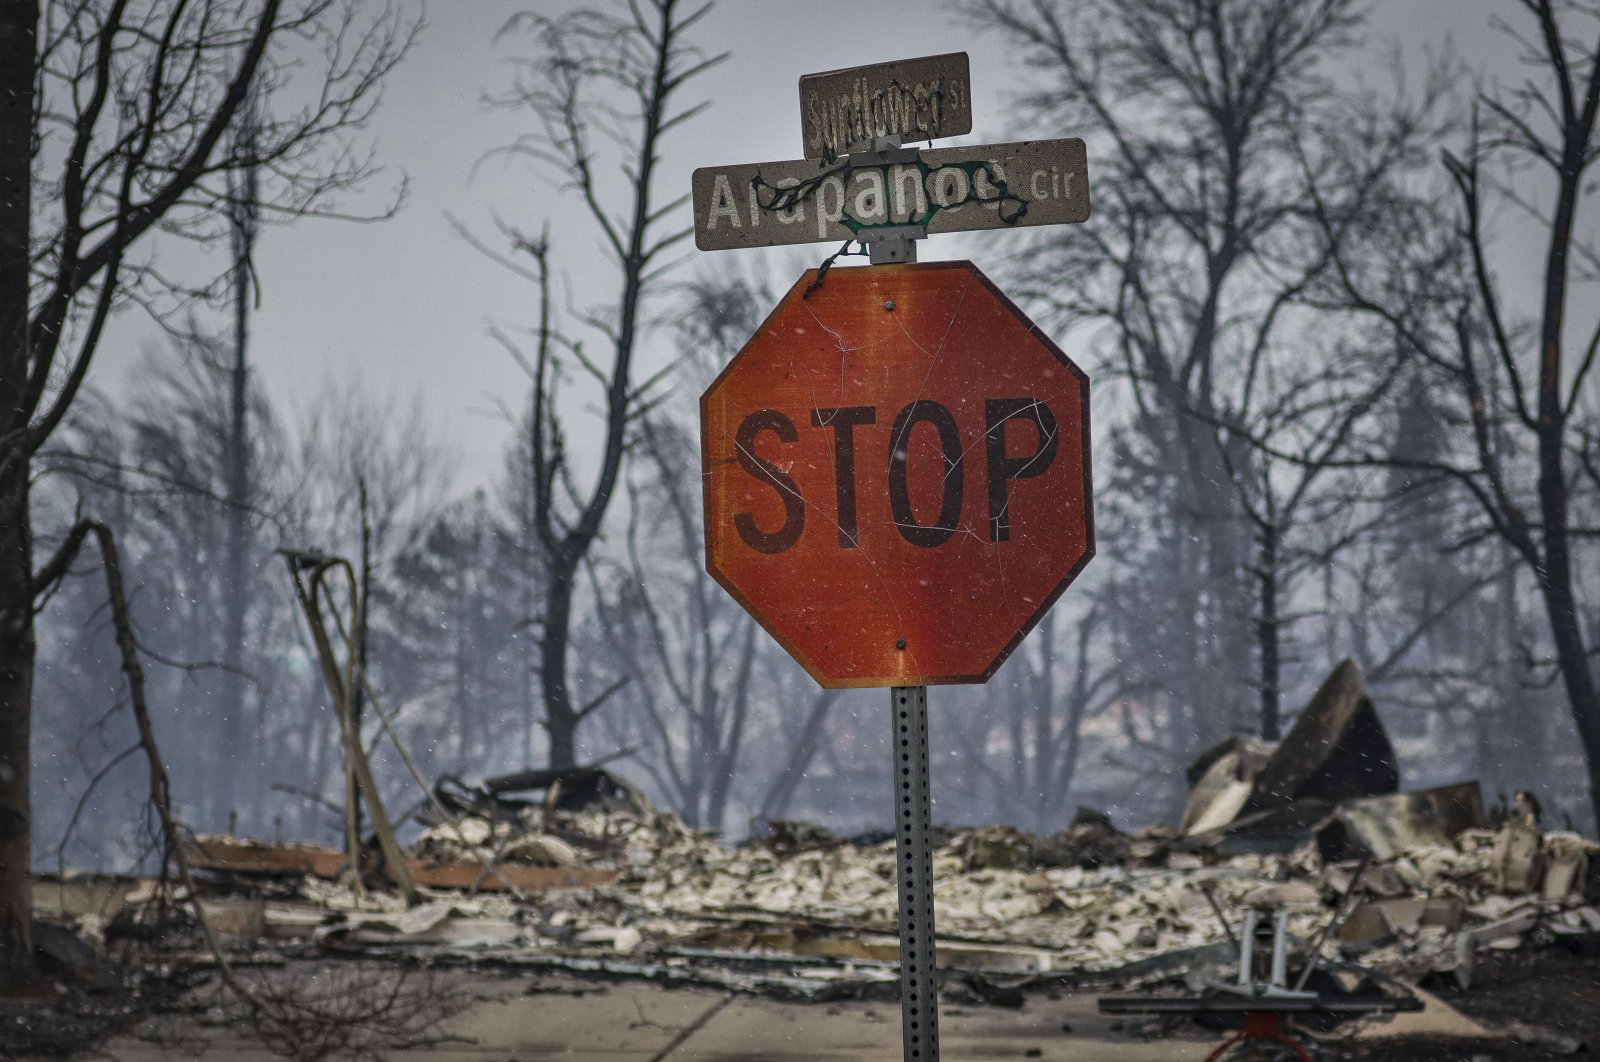 A stop sign and street signage peeled and cracking after intense heat from a wildfire in the aftermath of the Marshall Fire in Louisville, Colorado, on Dec. 31, 2021. (Getty Images/AFP Photo)